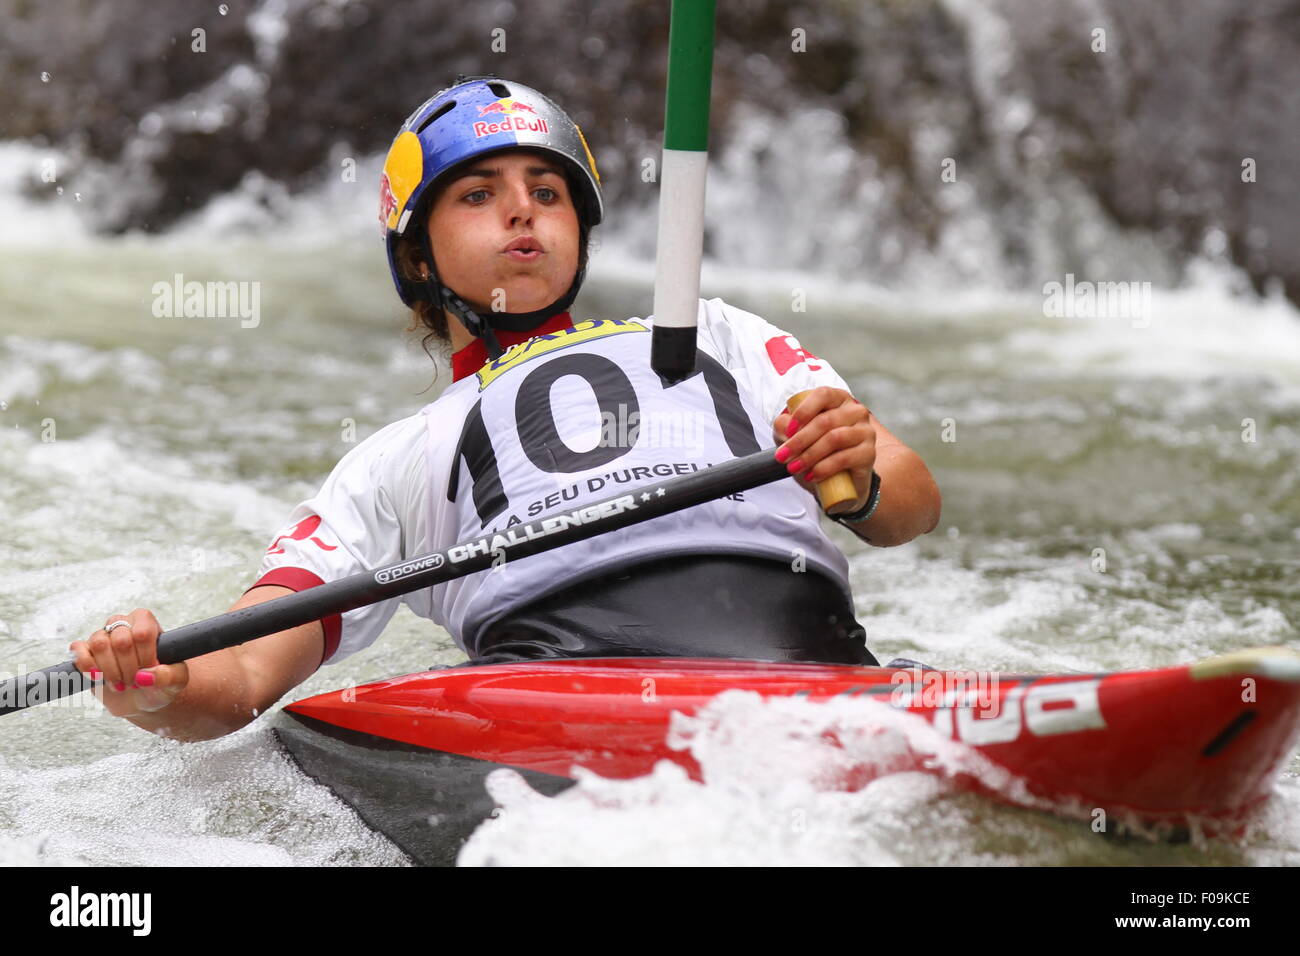 08.08.2015 La Seu d'Urgel, Lleida, Spain. ICF Canoe Slalom Womens World Cup 4. Jessica Fox (AUS) in action during canoe single (C1) womens final at Canal Olimpic Stock Photo